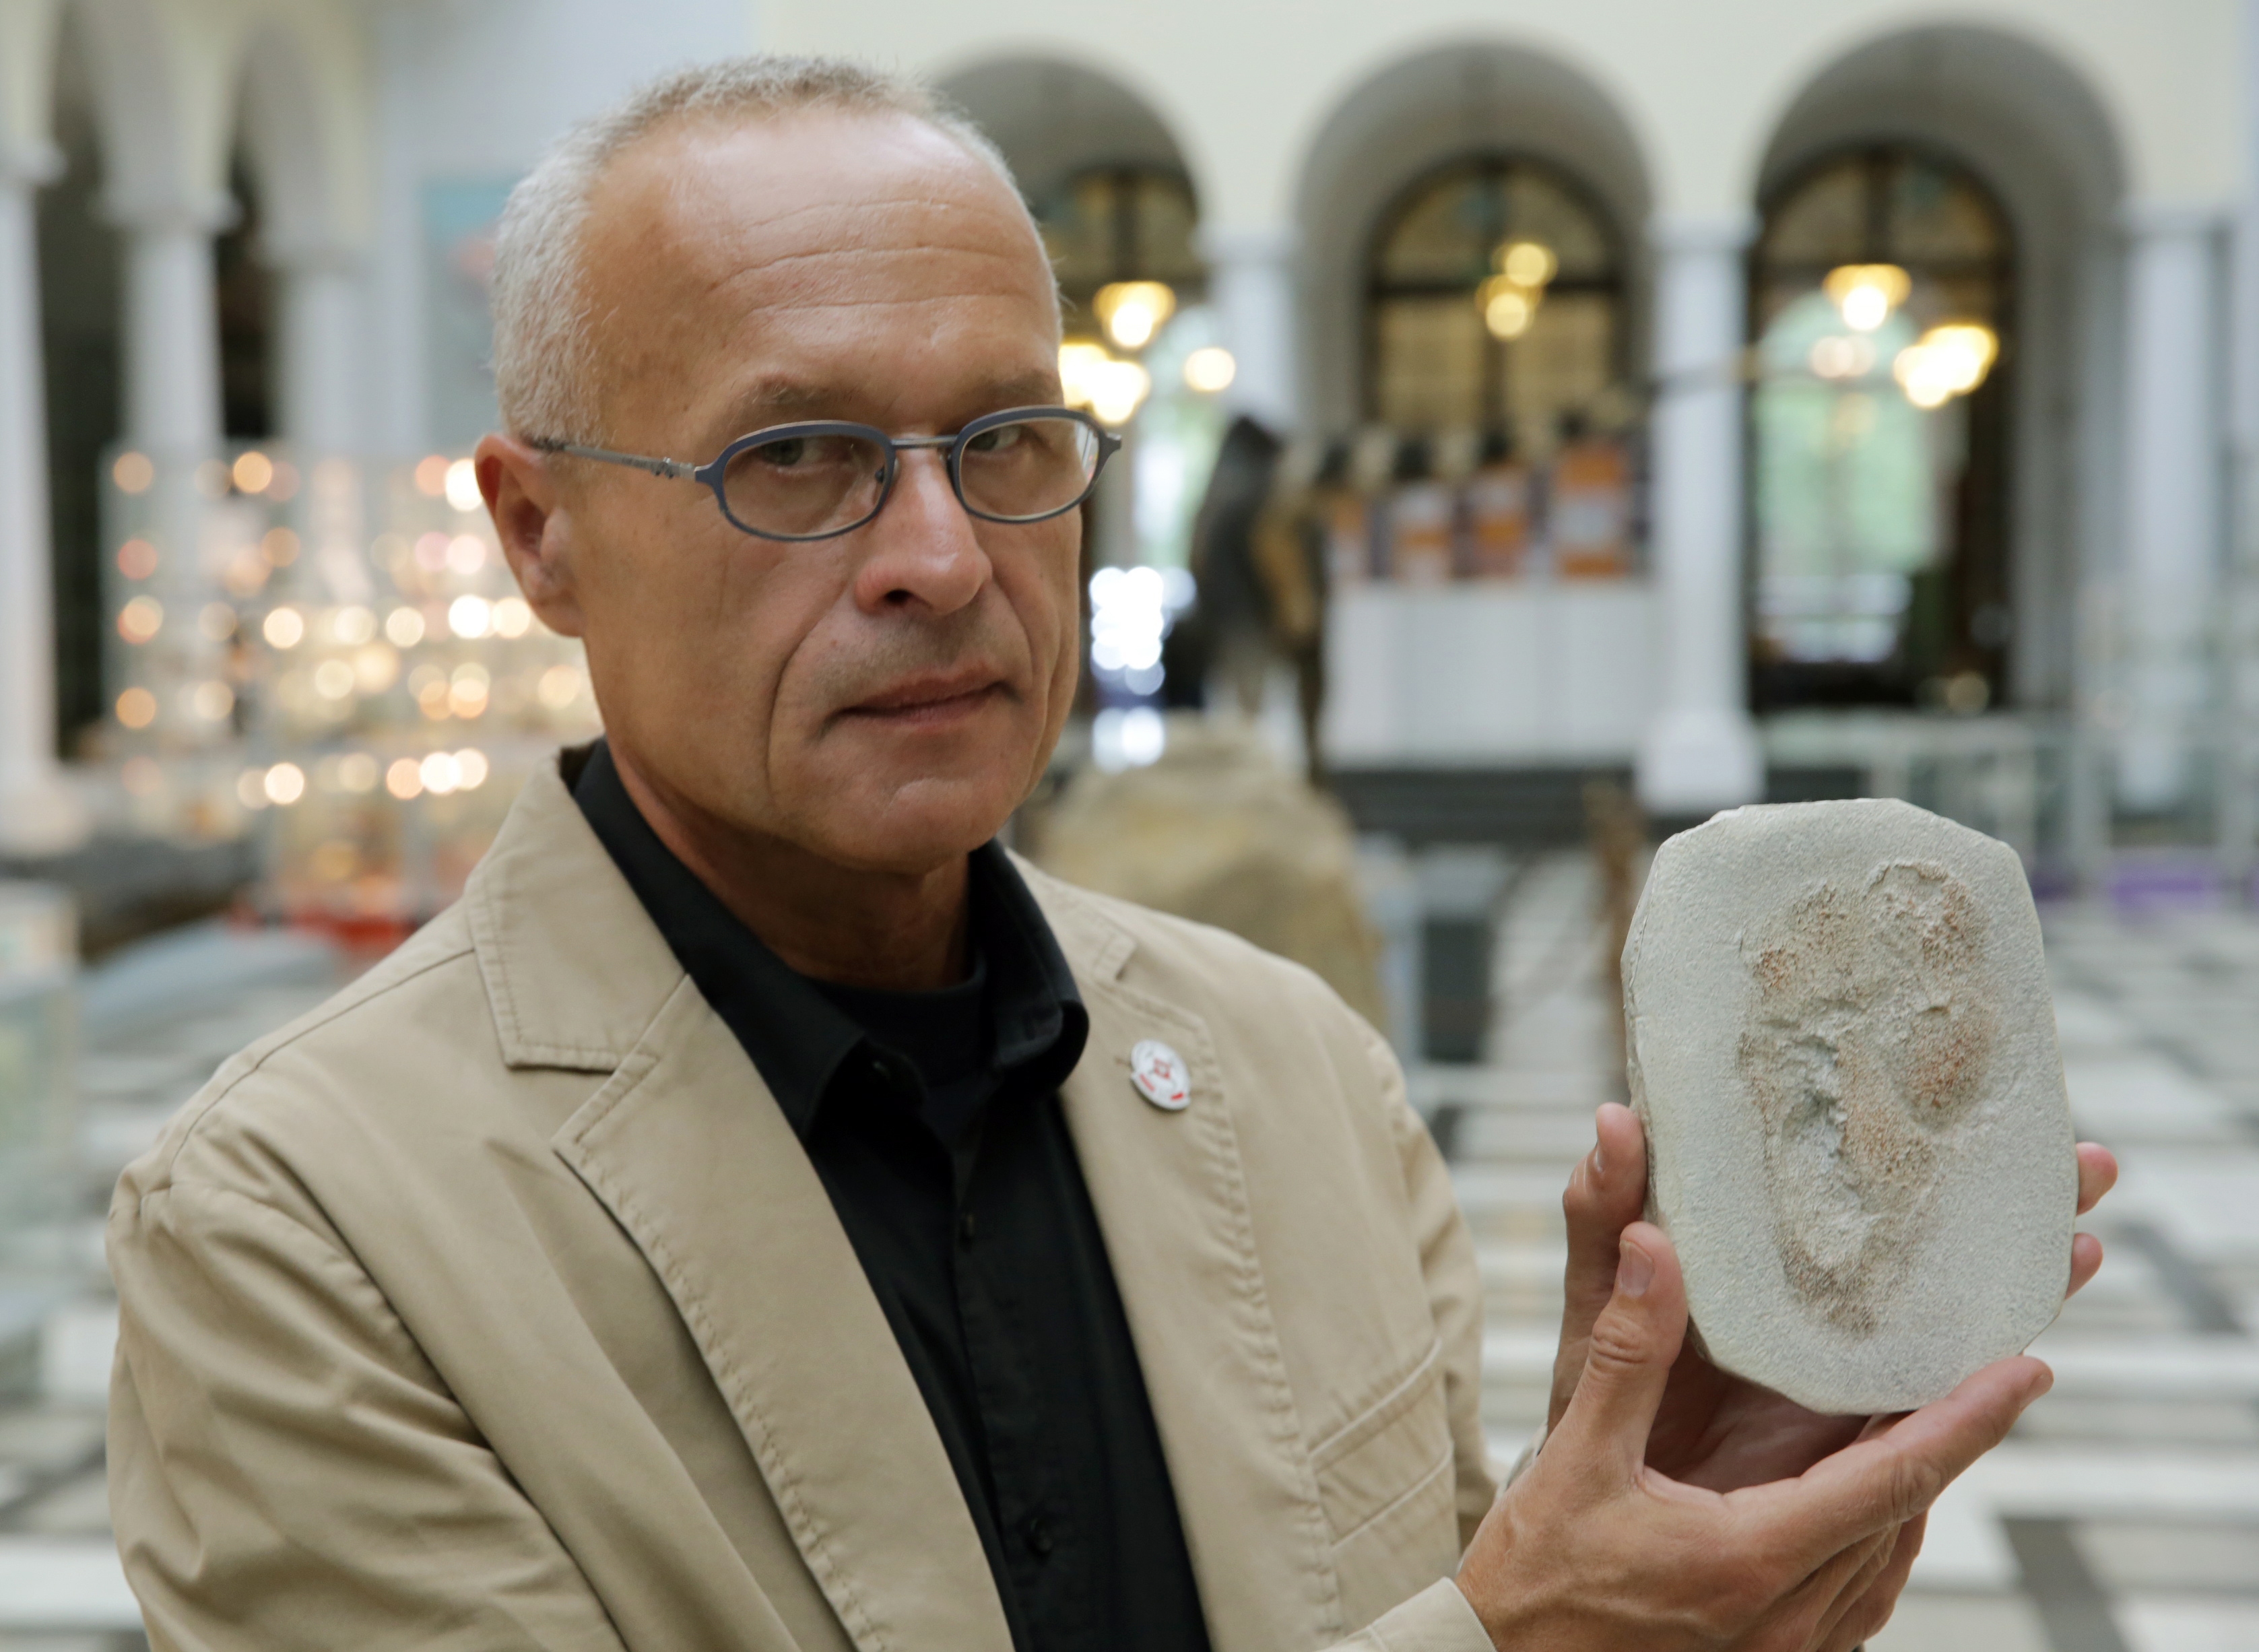 Gerard Gierlinski presents a plaster replica of one of the Trachilos footprints during a press conference in Warsaw, Poland, in September 2017. (Tomasz Gzell/EFE/EPA)